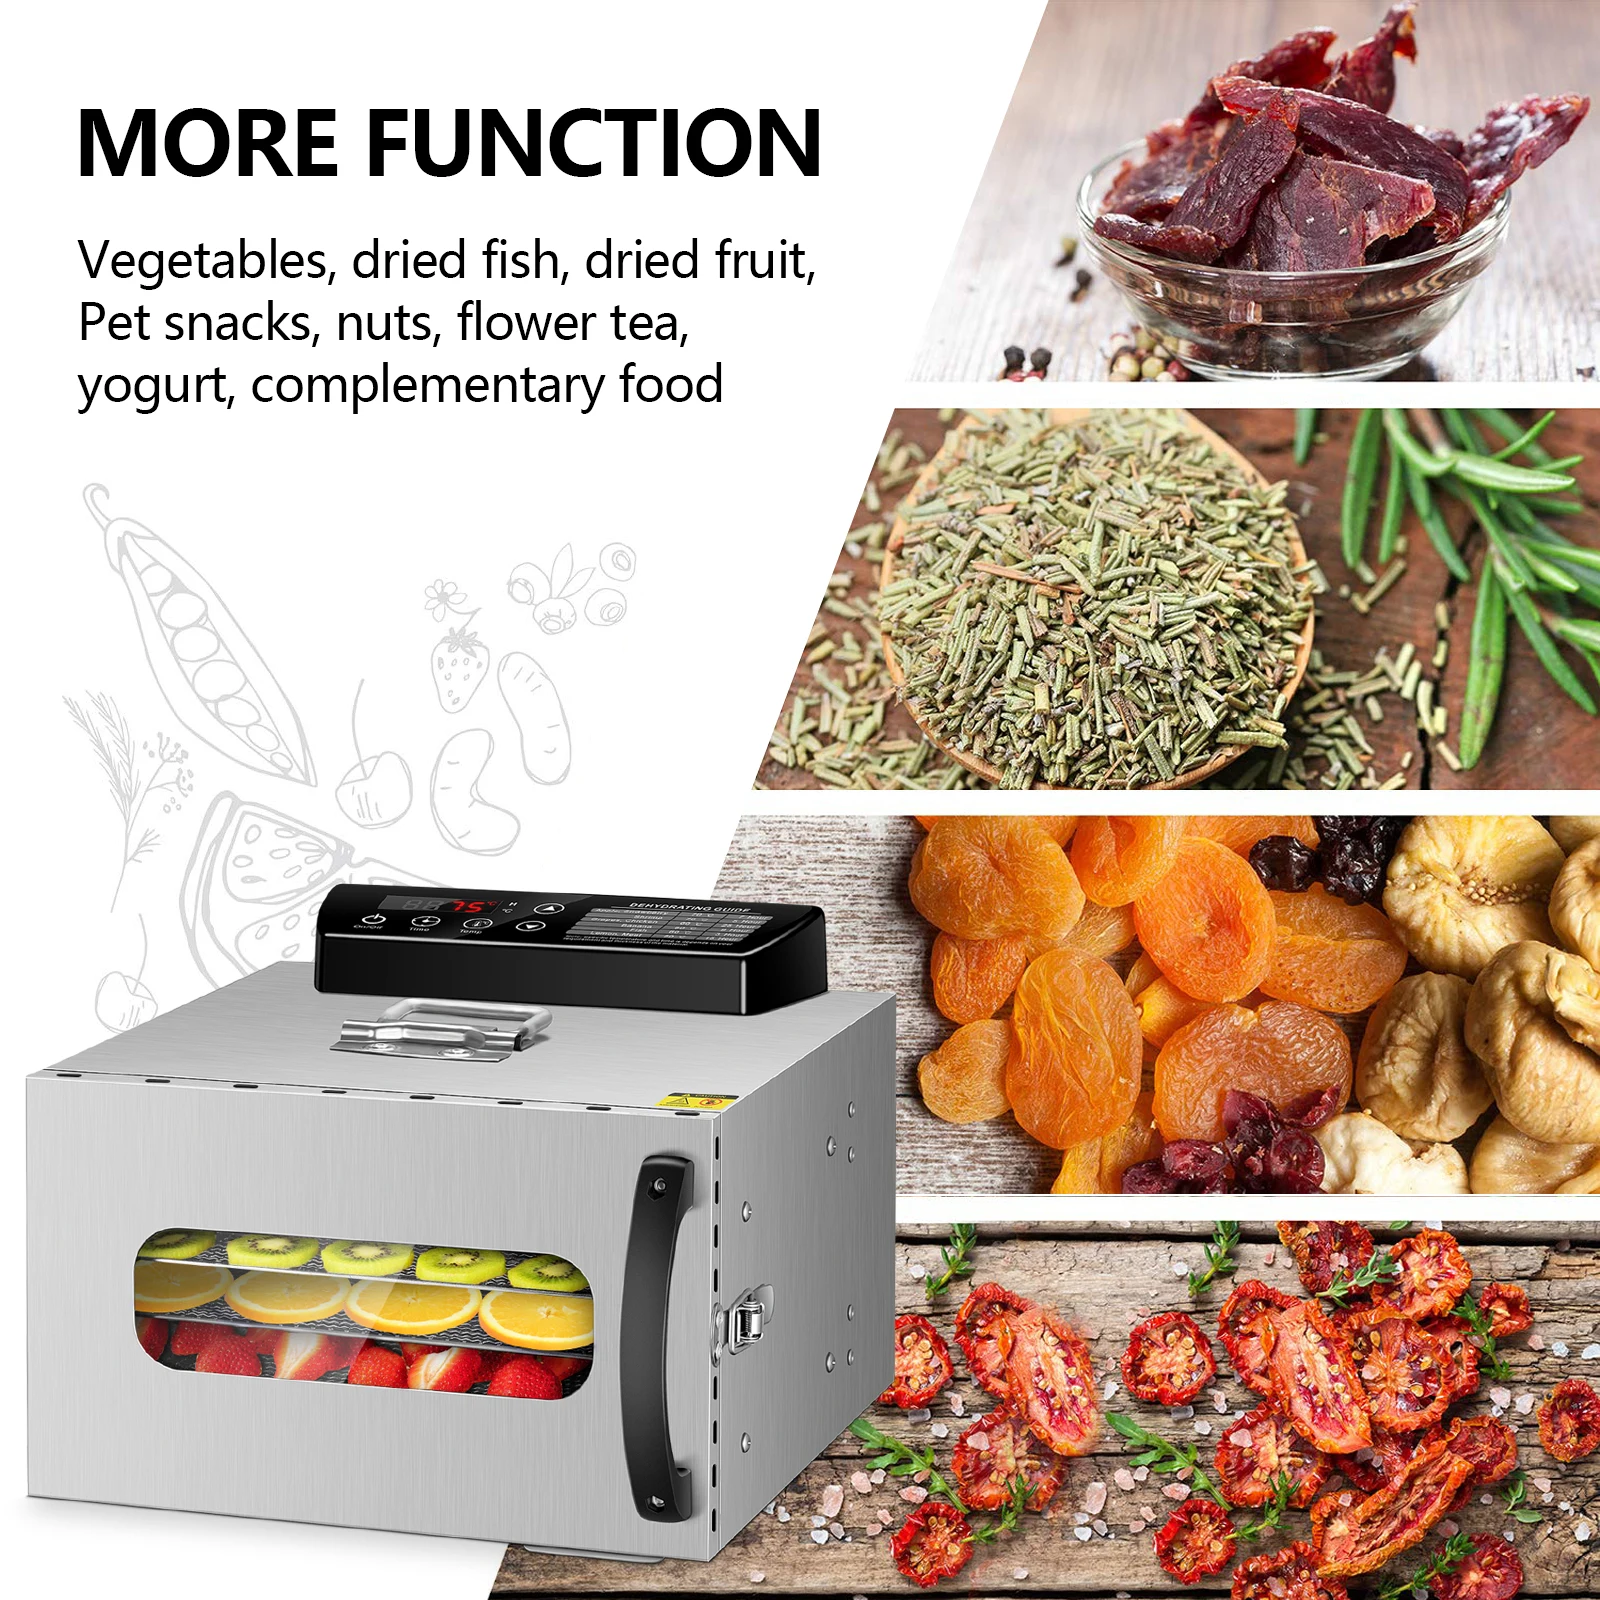 

KWASYO 6 Trays Food Dehydrator Fruit Drying Machine Dryer For Vegetables Dried Fruit Meat Drying Machine Stainless Ste